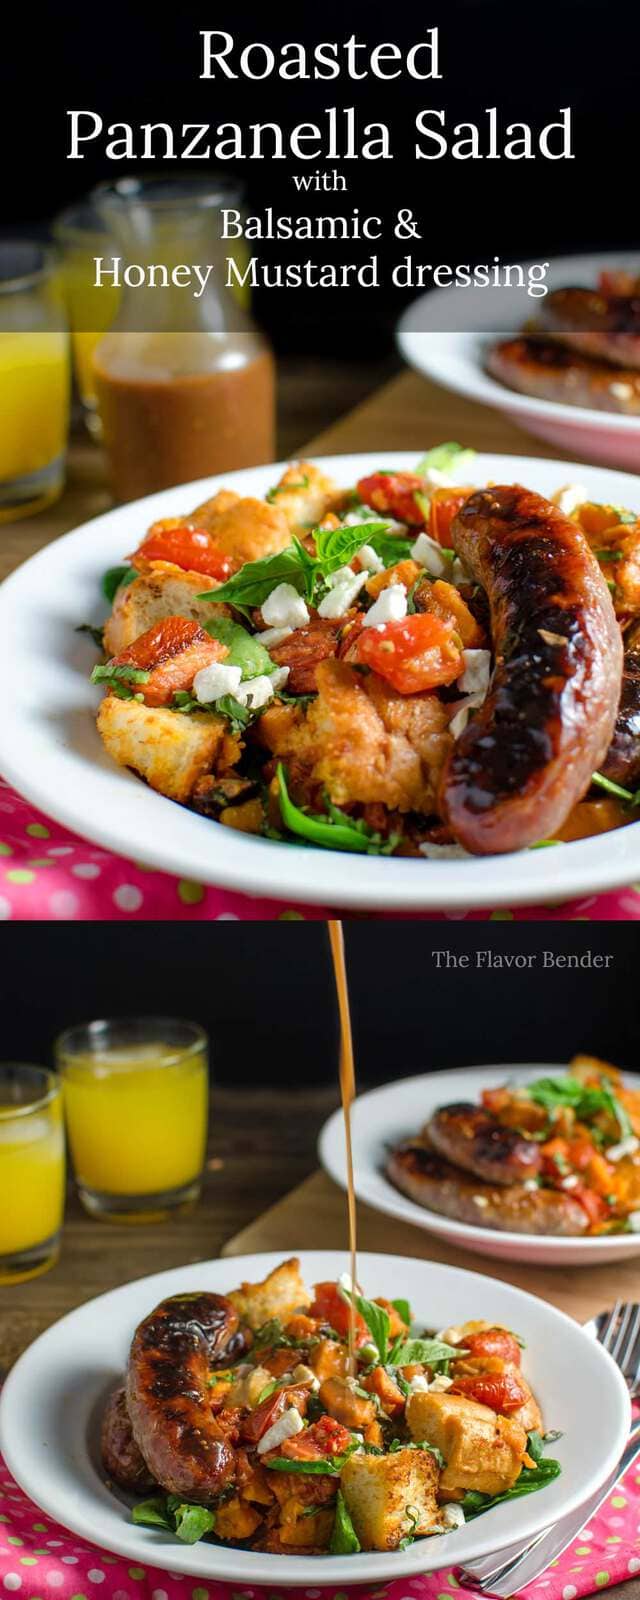 Roasted Panzanella Salad with a Balsamic Honey Mustard Dressing- with roasted Sausages, Tomatoes, Sweet potatoes, Goat cheese and Herbs is easy to make, and can be eaten warm, or at room temperature! Perfect for winter or any time of the year.